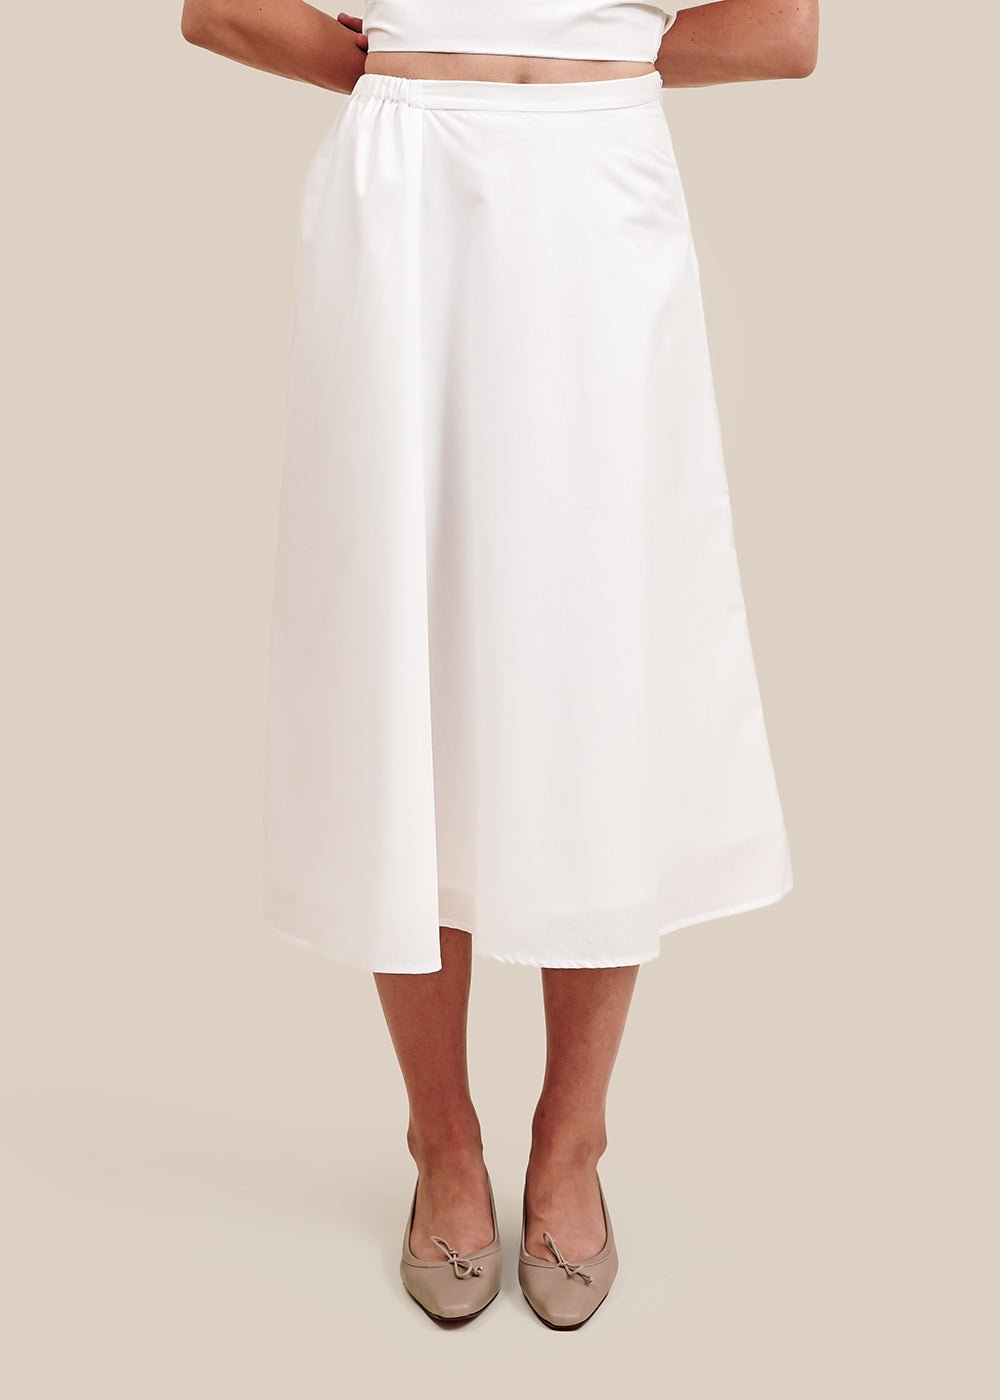 Angie Bauer White Corsica Skirt - New Classics Studios Sustainable Ethical Fashion Canada